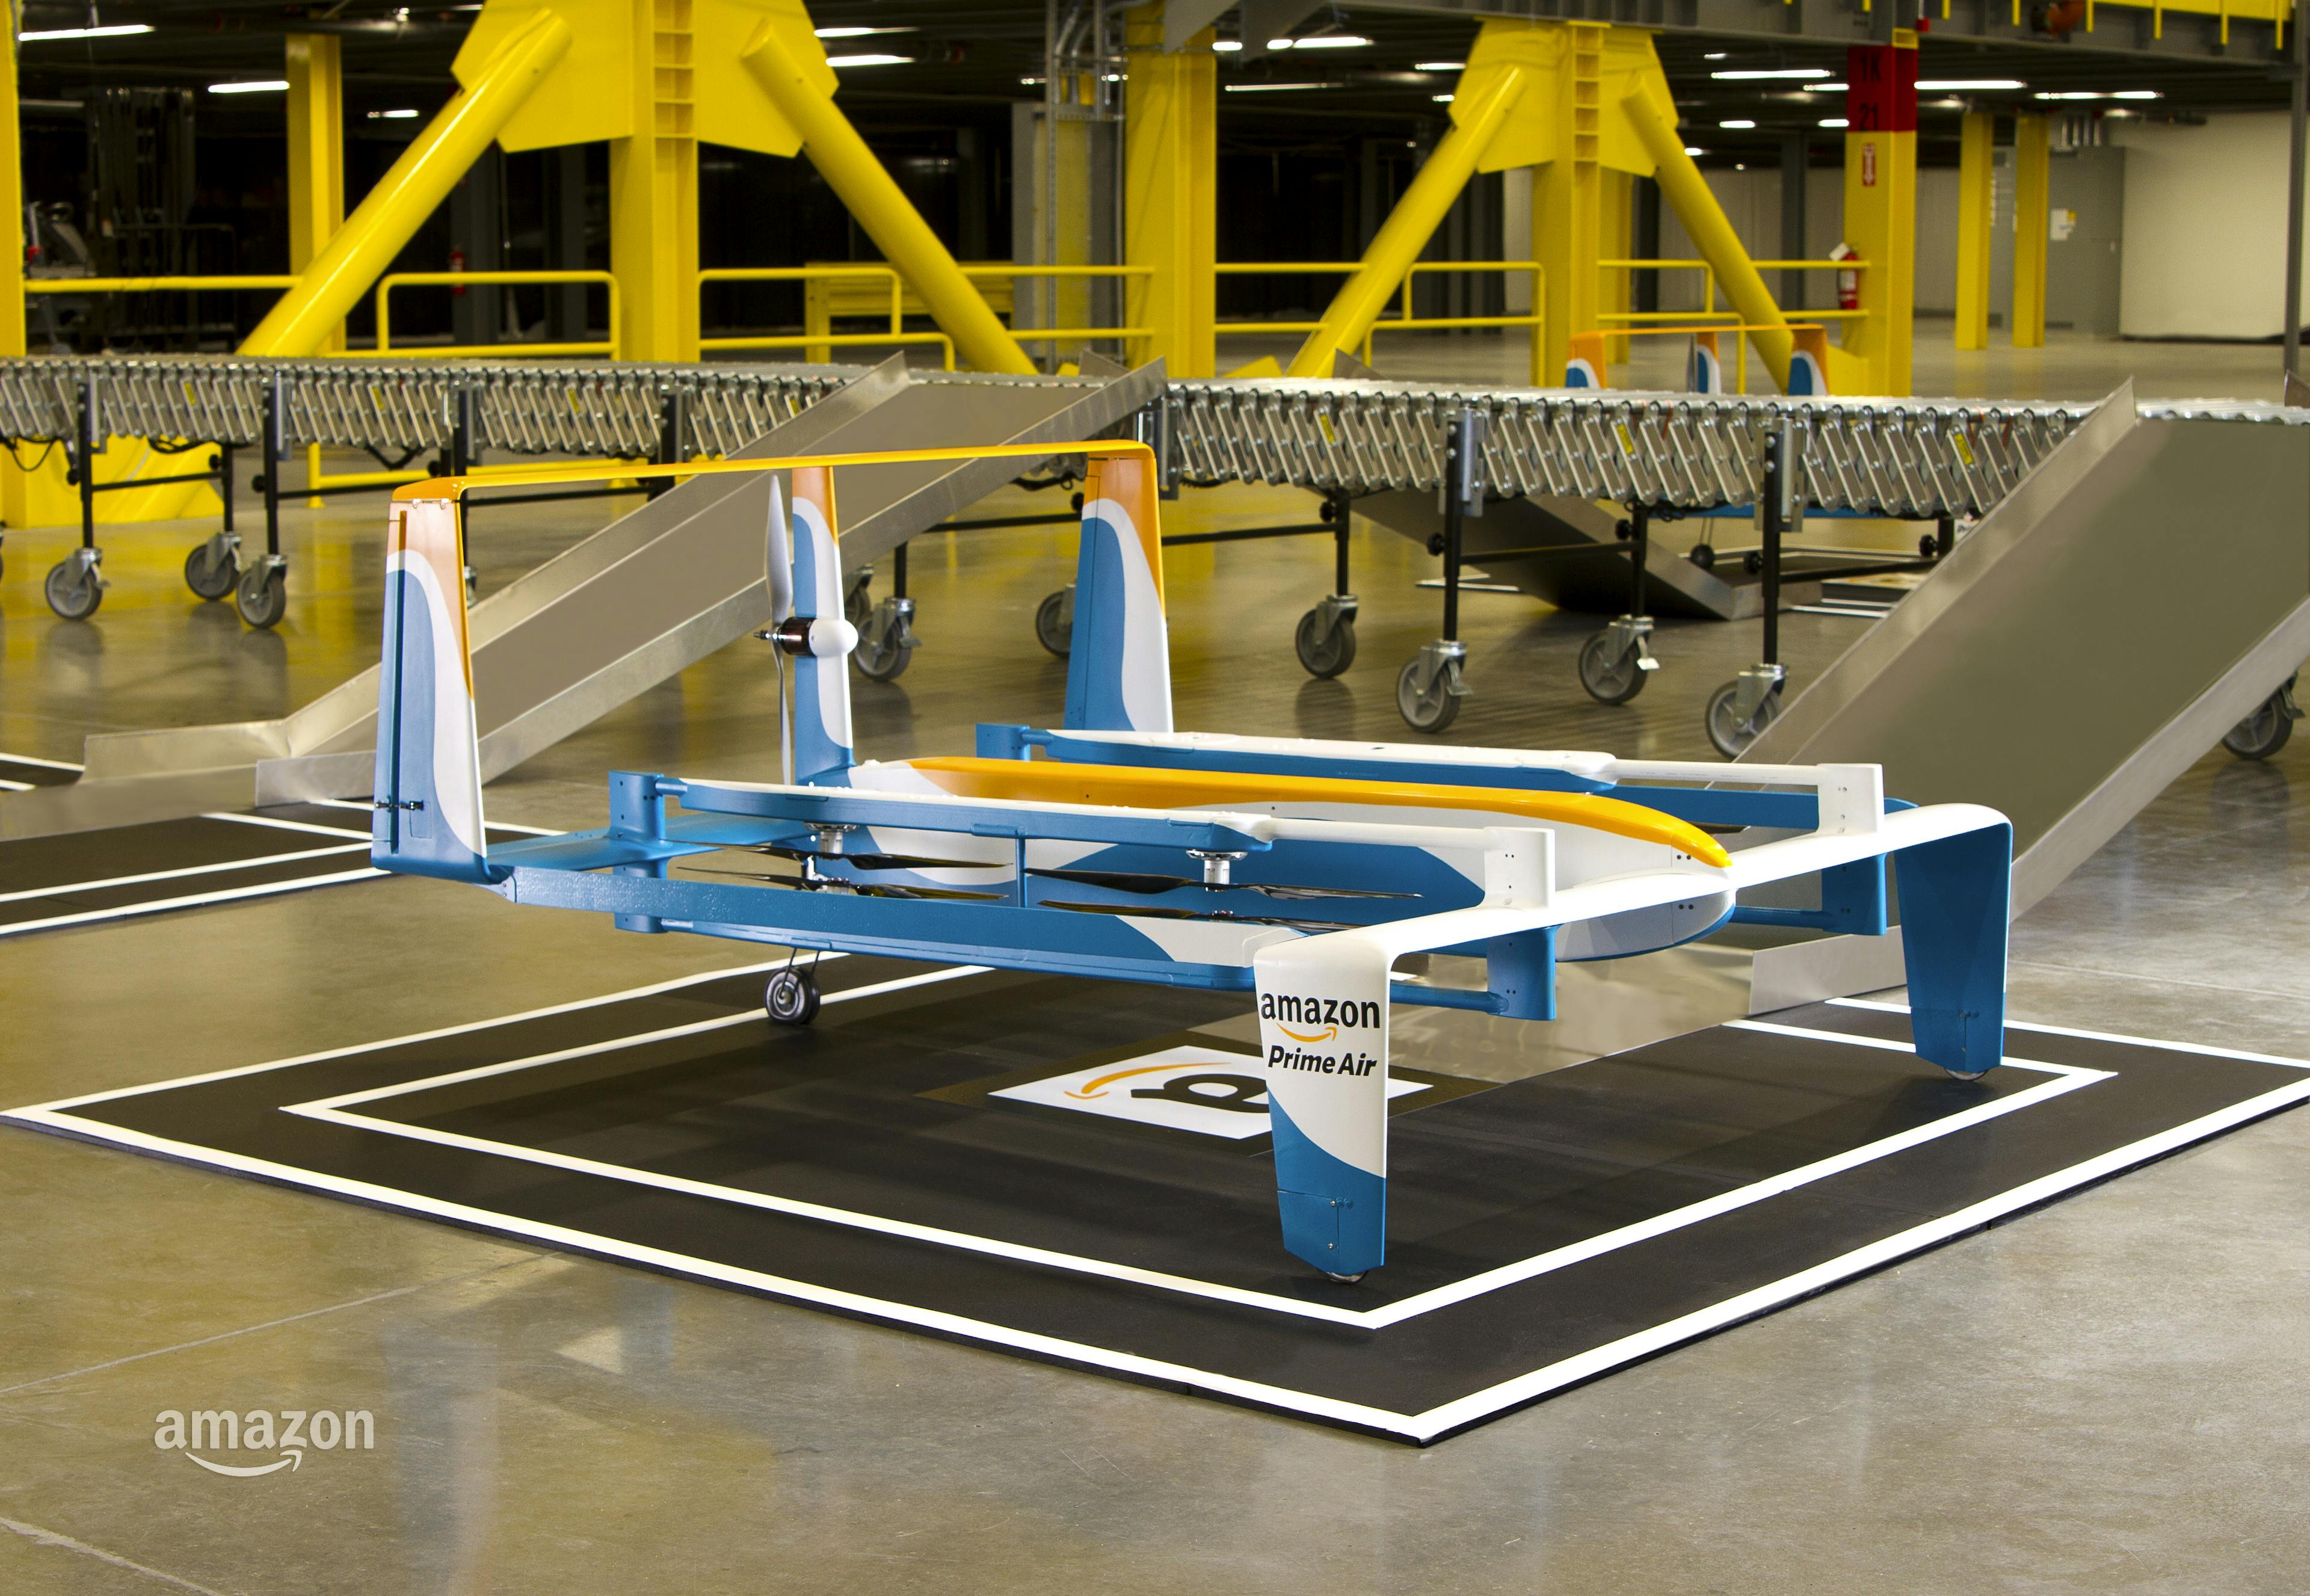 Amazon Has Spent Nearly $10 Million Lobbying for Drone Delivery